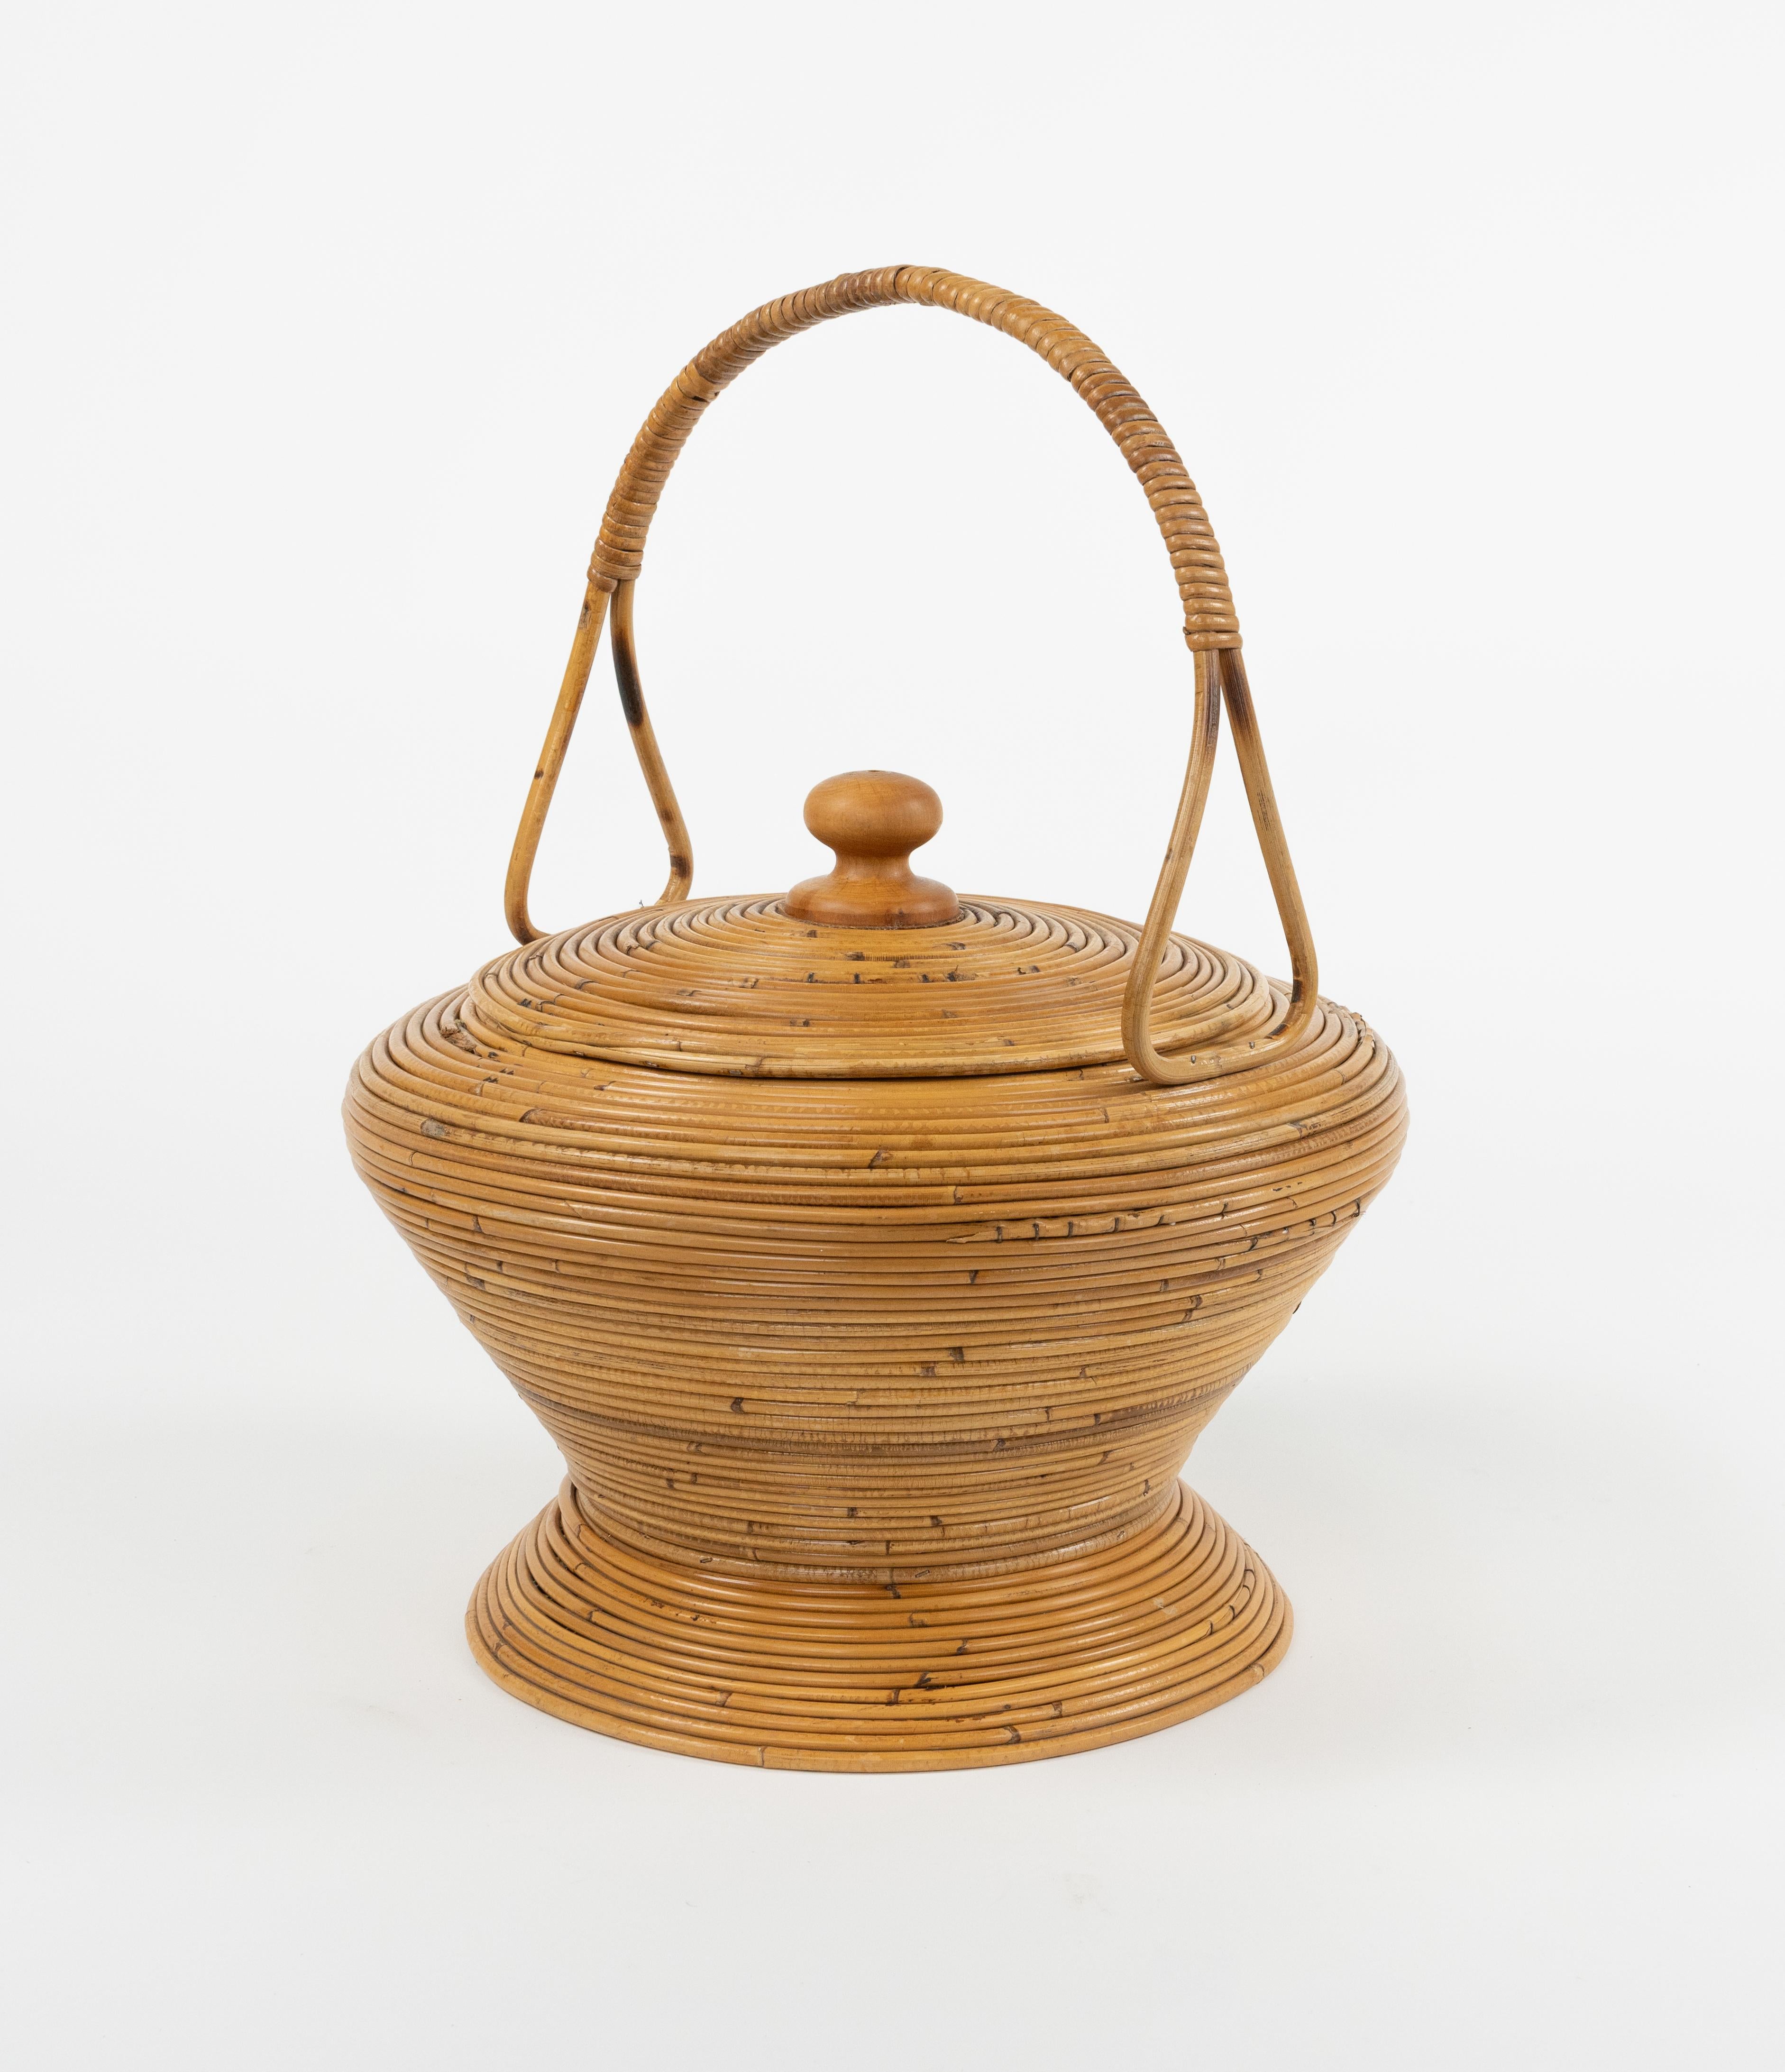 Midcentury amazing decorative basket in curved rattan with handle attributed to Vivai Del Sud.

Made in Italy in the 1960s.

Vivai del sud, Gabriella Crespi and Arpex were the three leading design studios in 1970s Italy specialized in this high-end